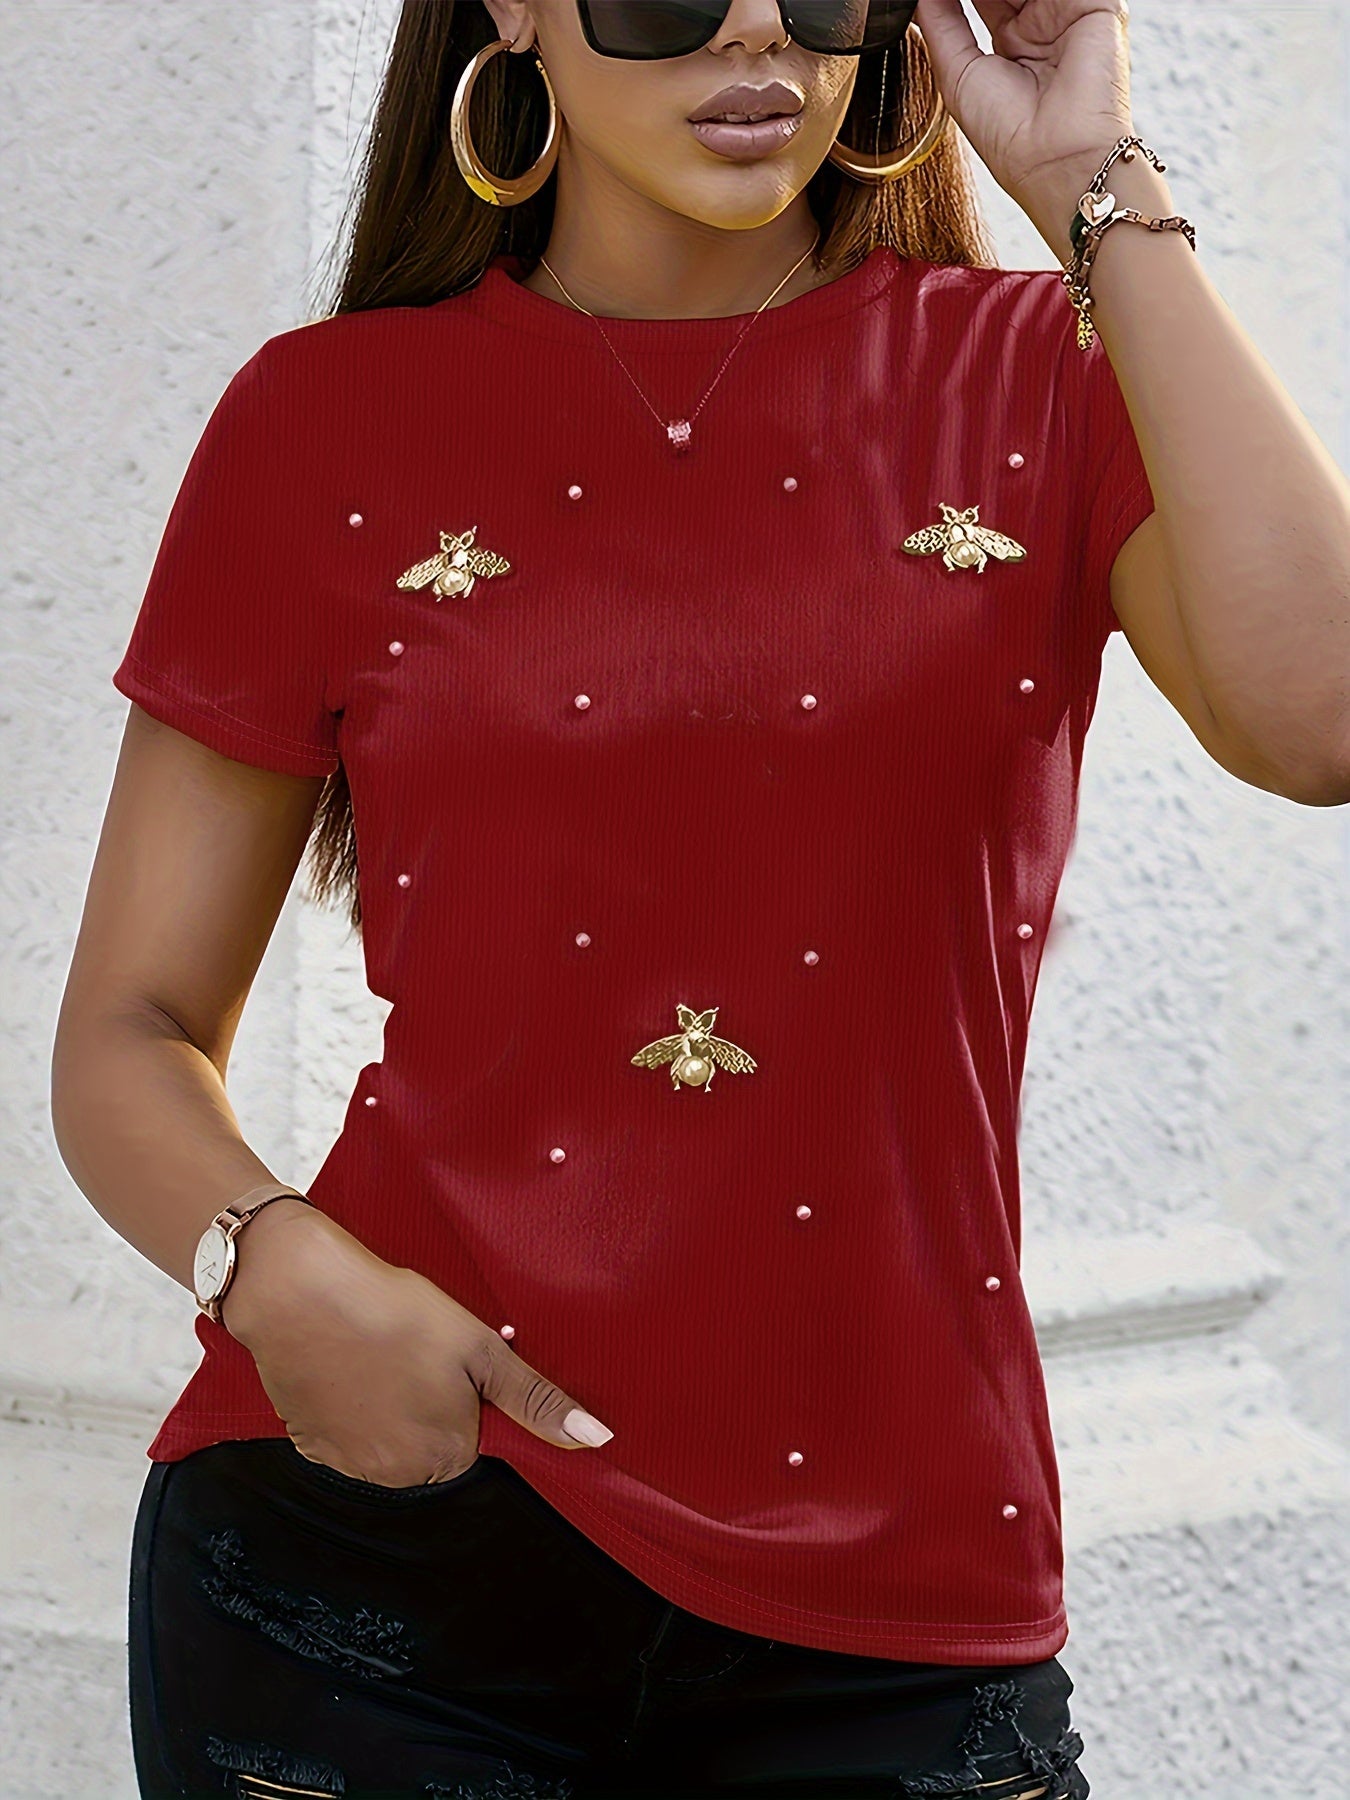 Beaded Butterfly Decor T-Shirt, Crew Neck Short Sleeve T-Shirt, Casual Every Day Tops